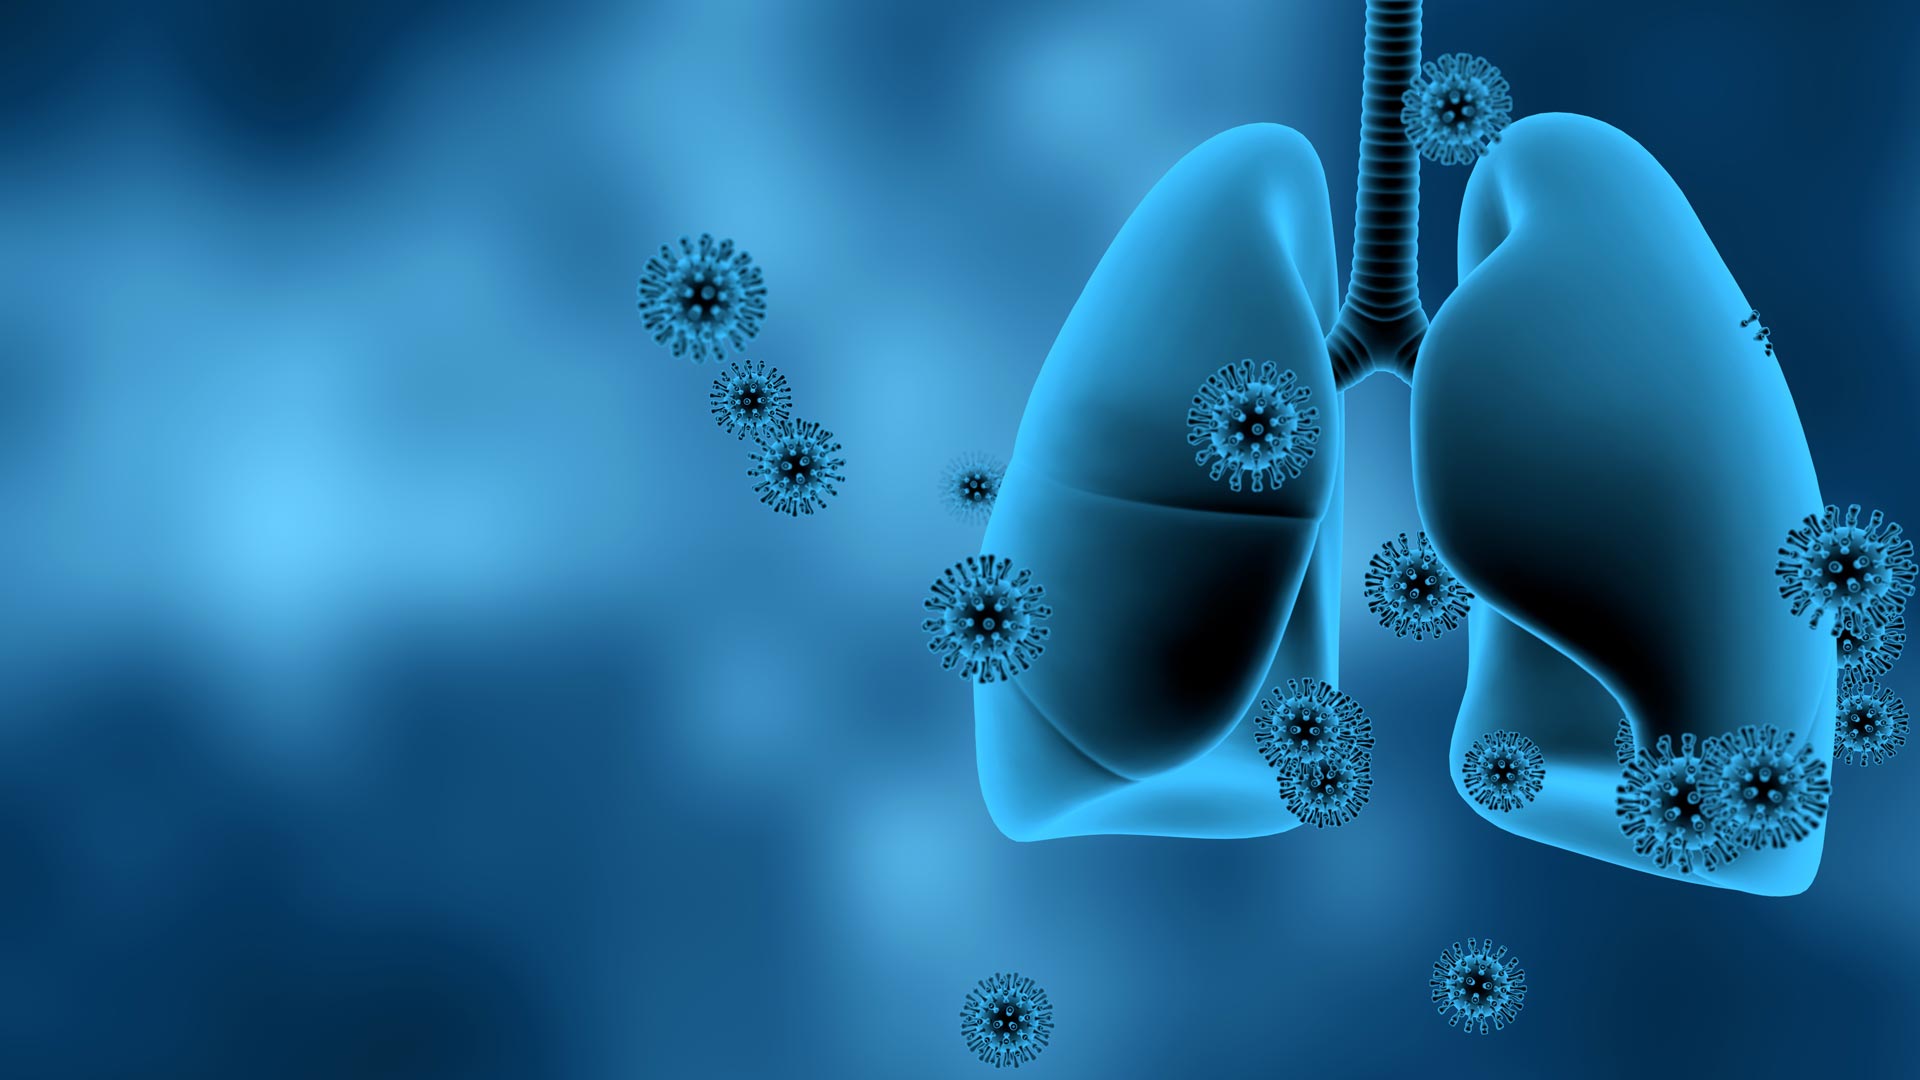 A Promising Drug for the Treatment of Severe Lung Inflammation in COVID-19 Patients: Montefiore-Einstein Scientists Lead Two Trials of Leronlimab